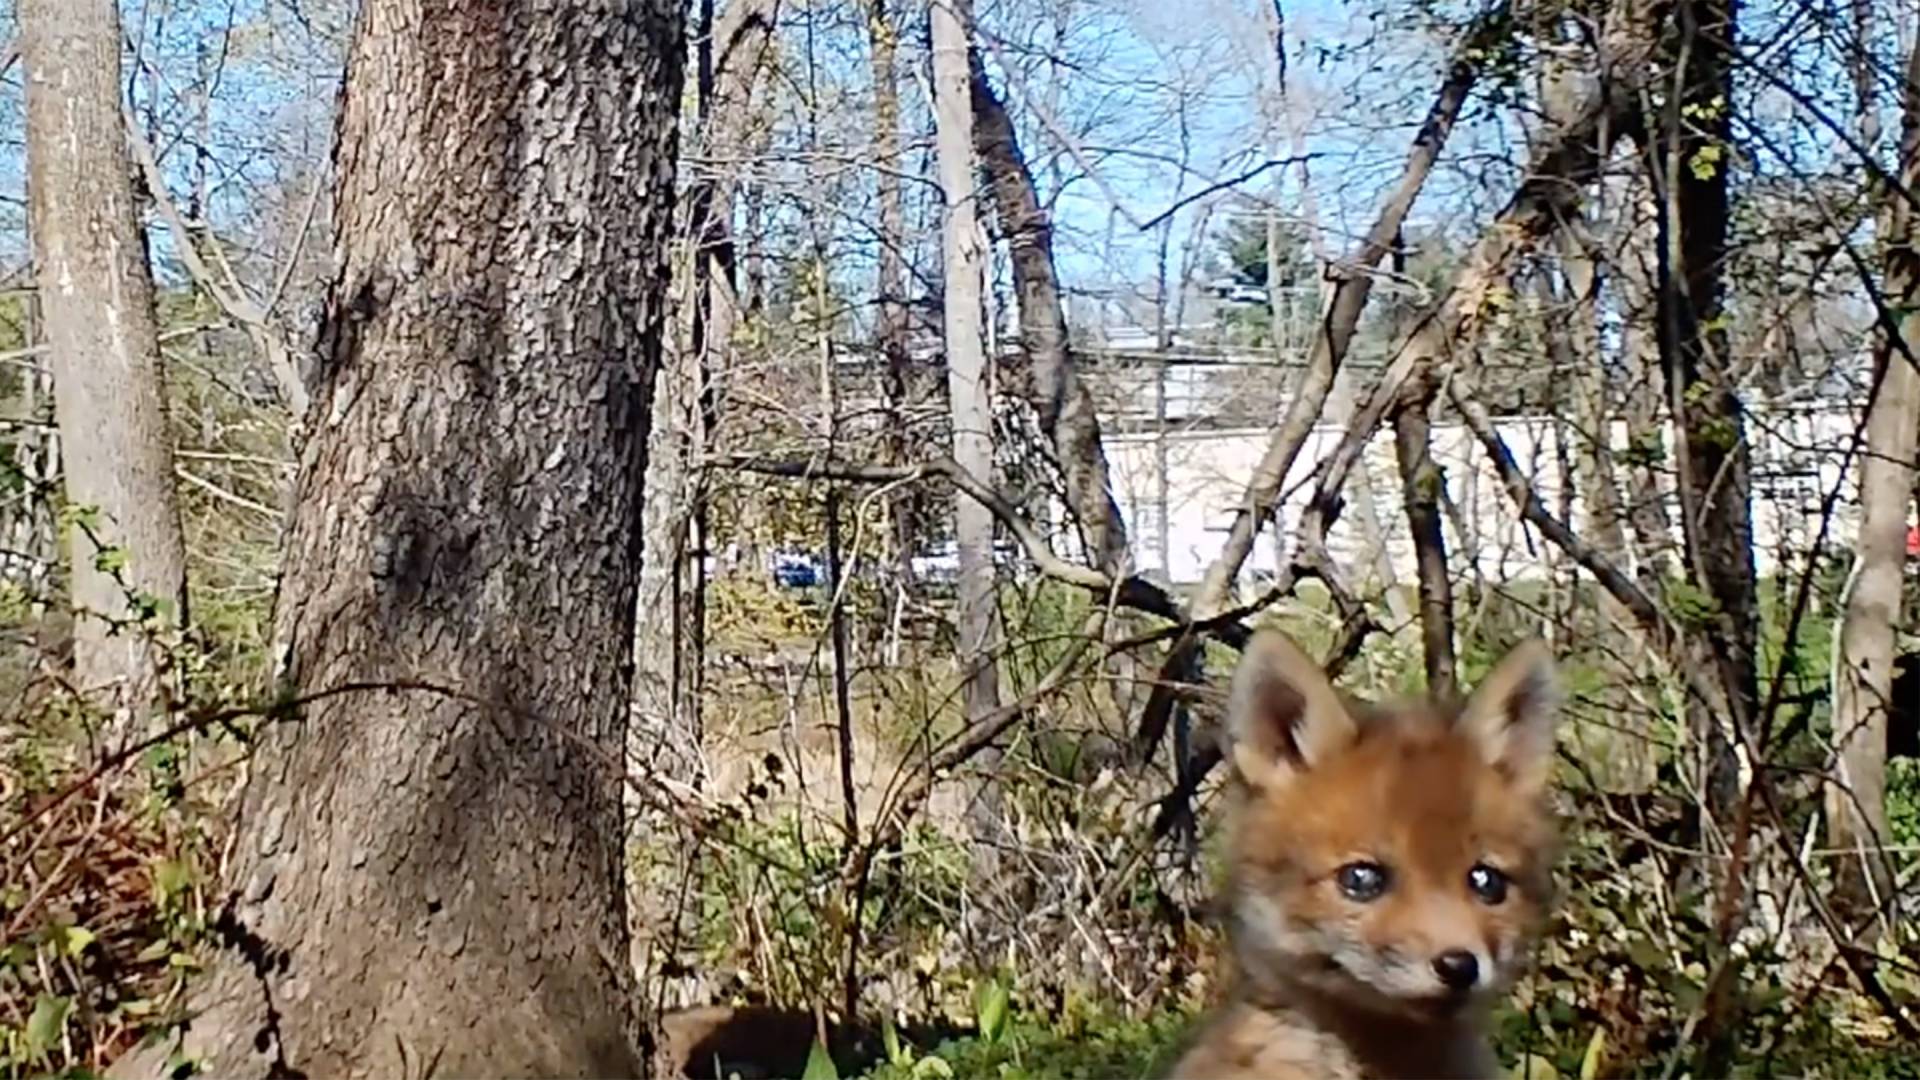 Fox pup looks into the camera